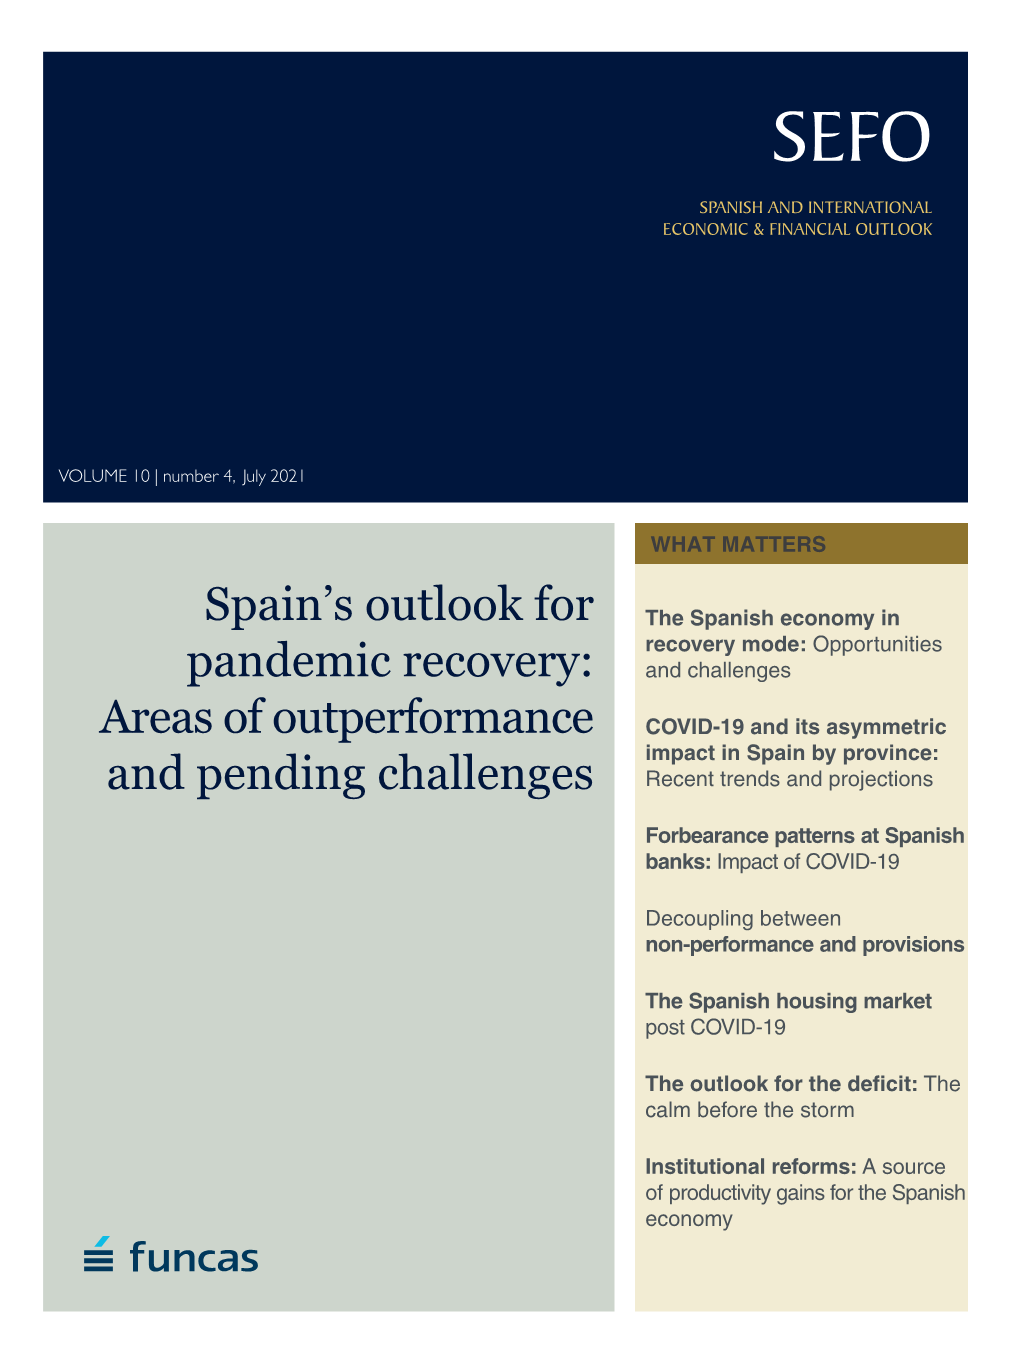 Spain's Outlook for Pandemic Recovery